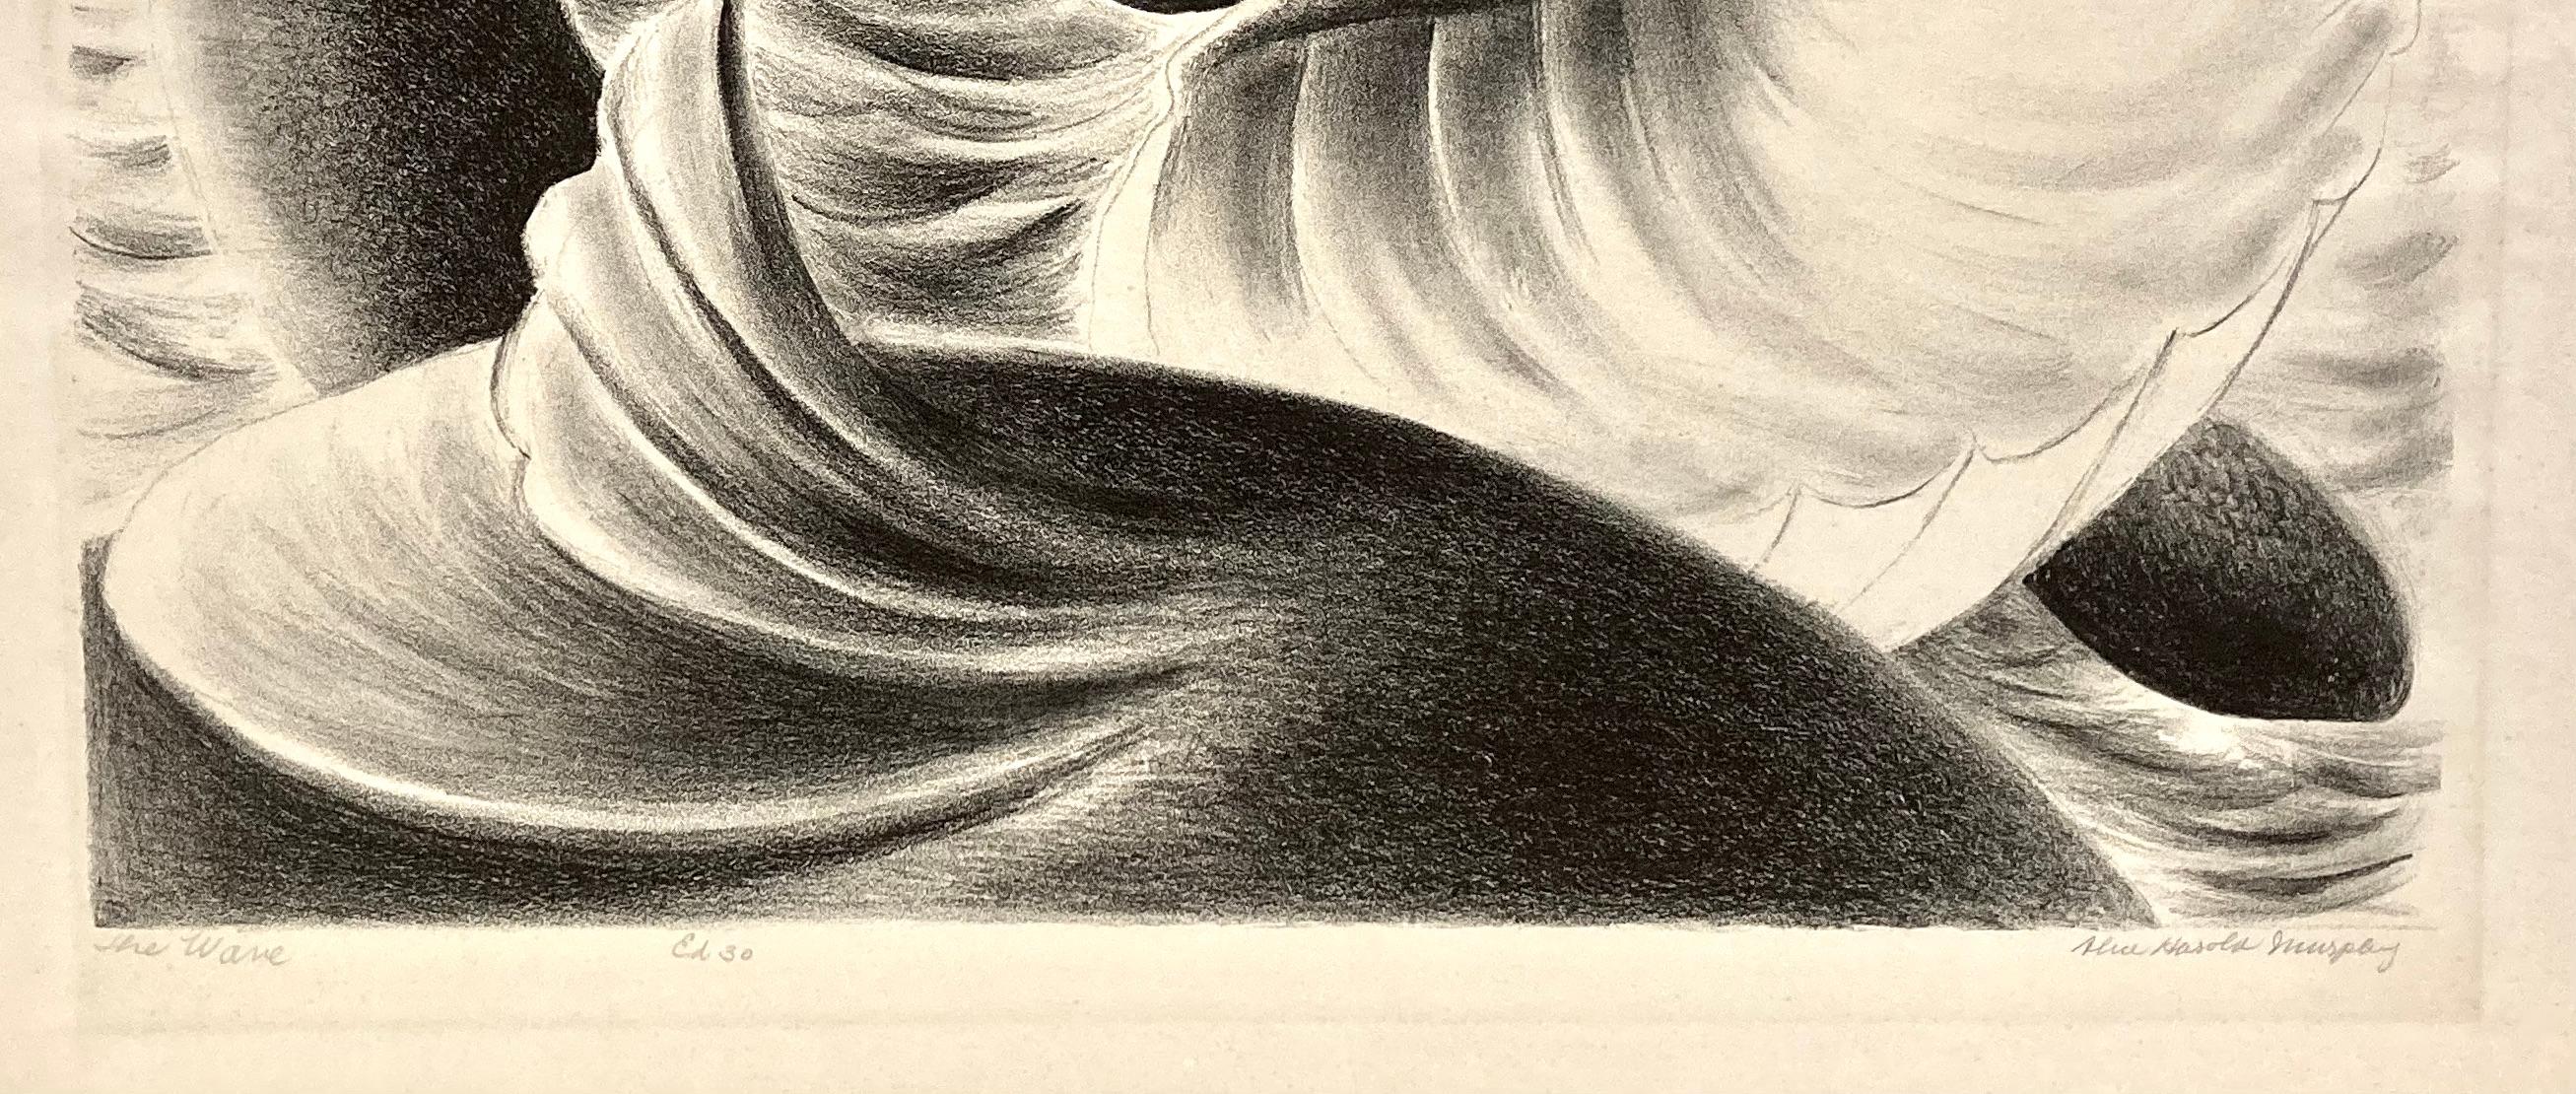 The title, The Wave, lends itself to suggesting that the woman (with her long, flowing hair) is personifying the wave. Or is she one with the wave? Is she pushing the water in perhaps? She seems to be encountering a shell and another sea creature